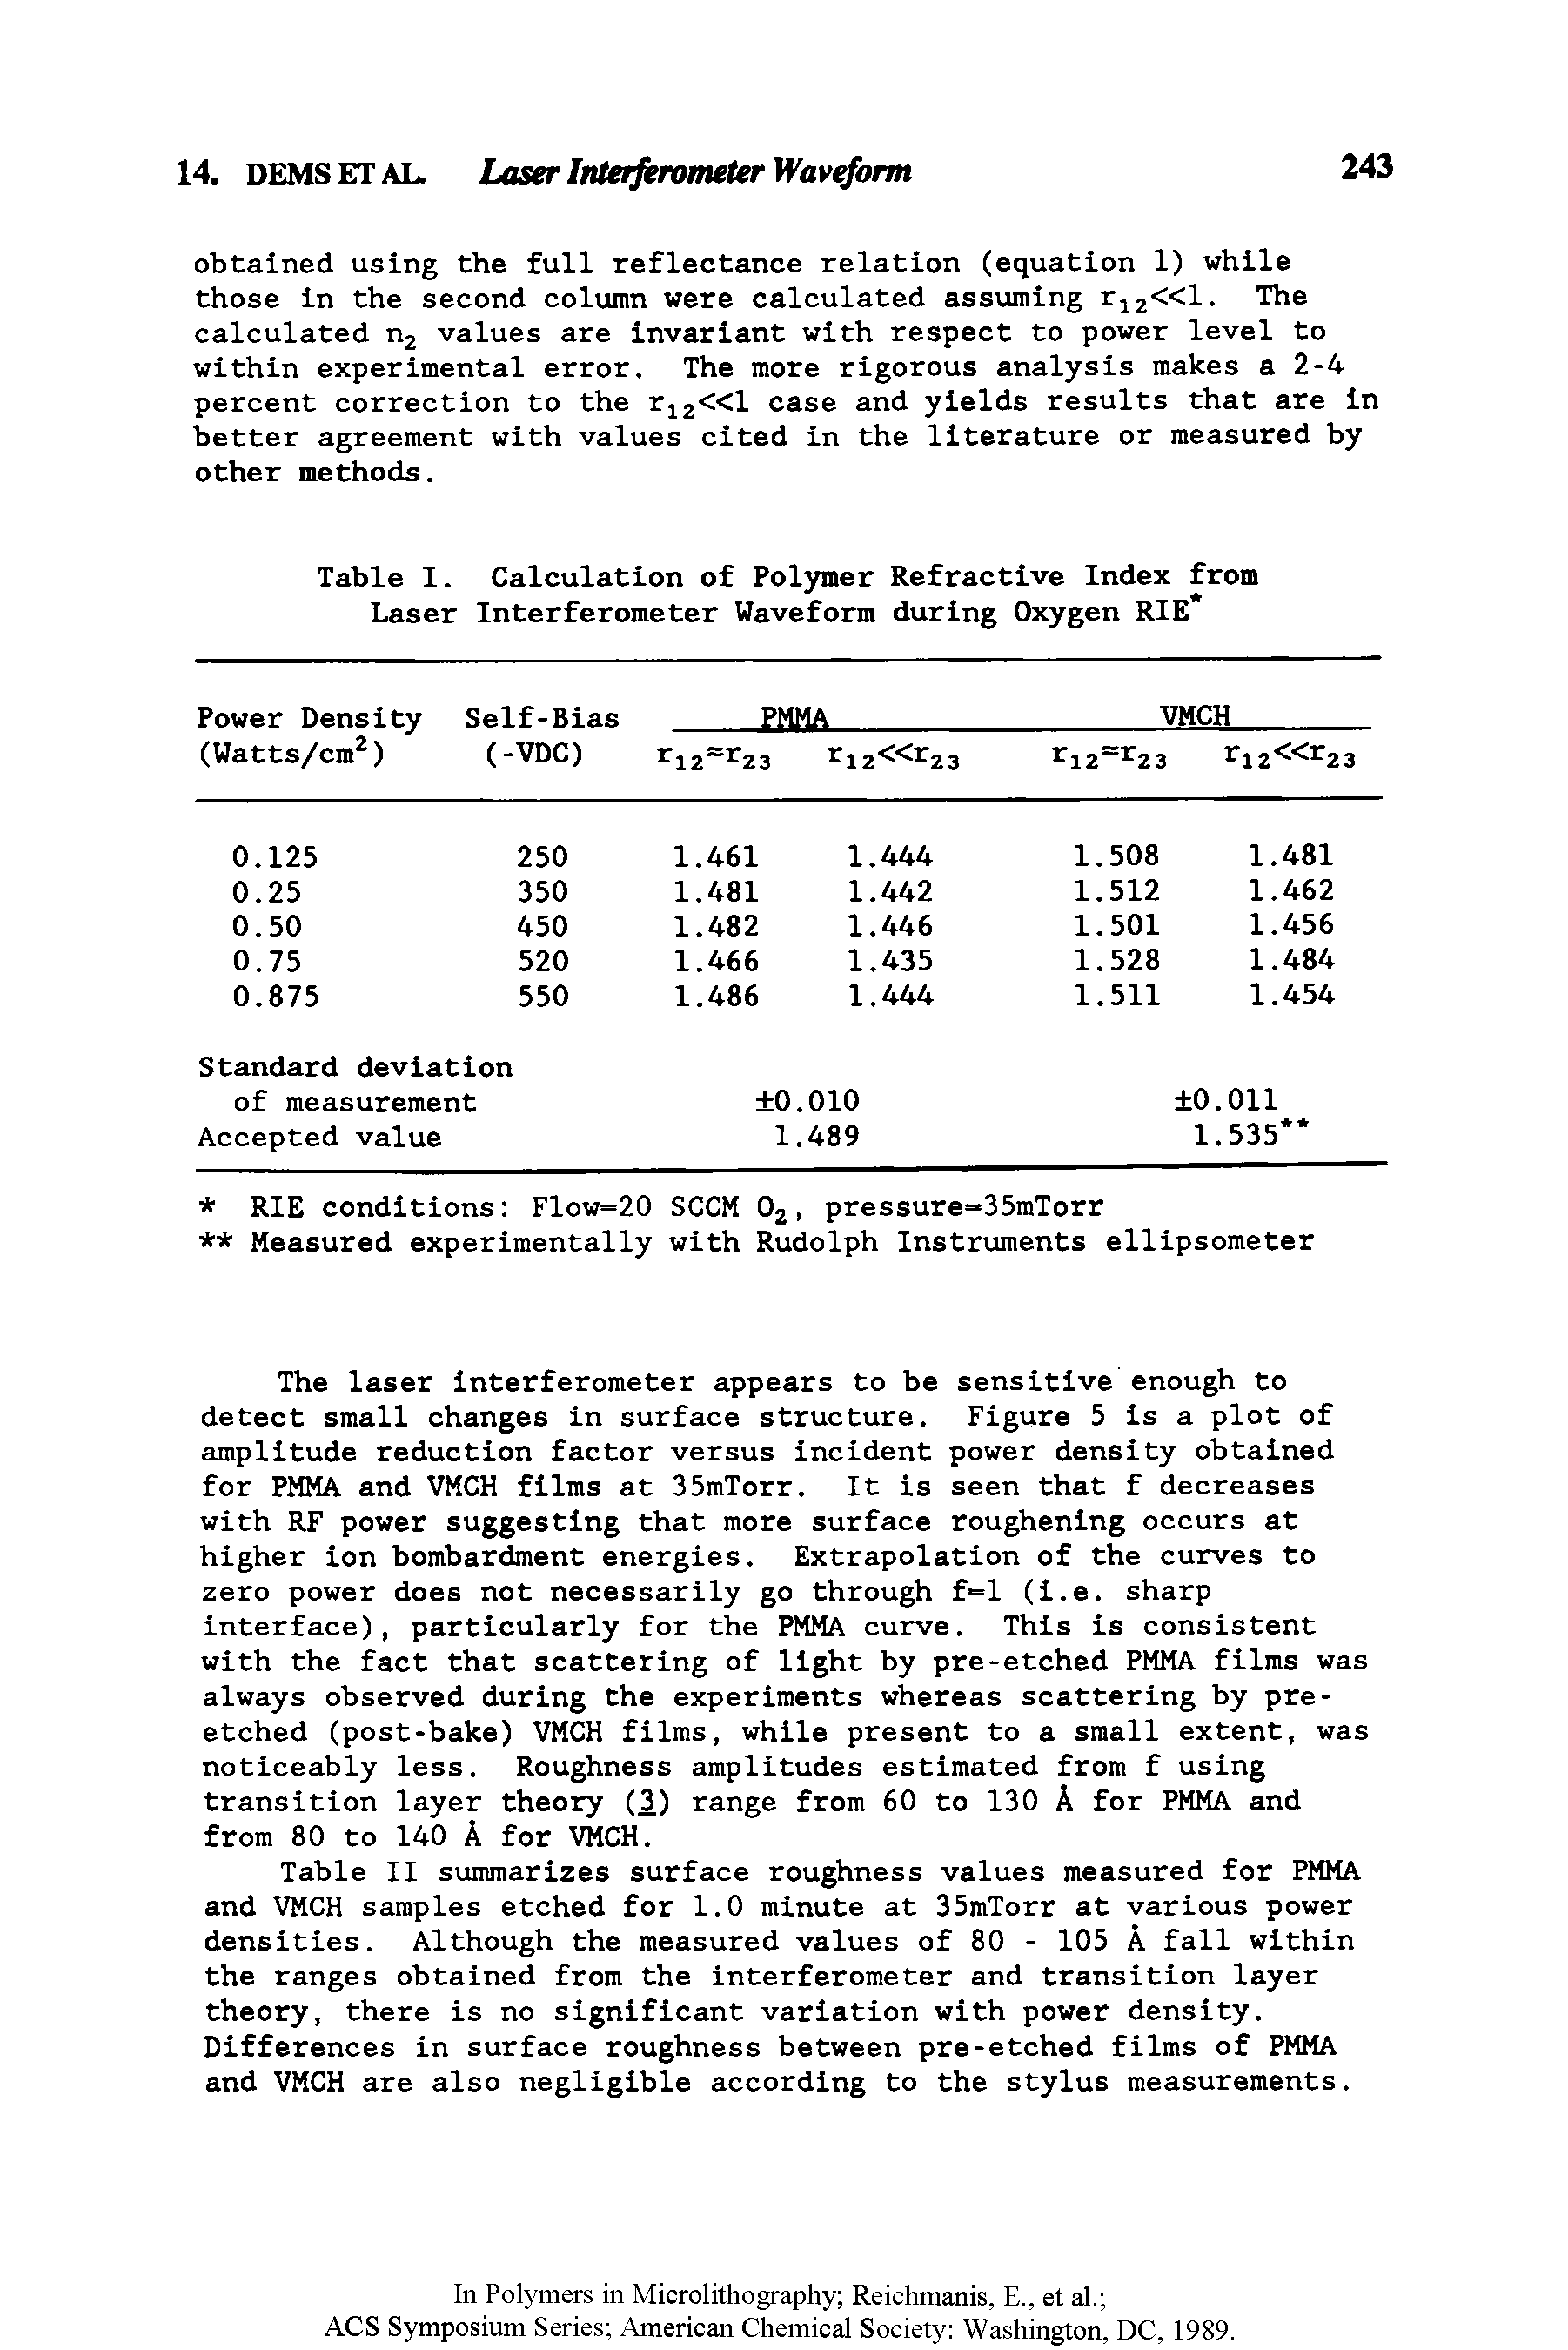 Table II summarizes surface roughness values measured for PMMA and VMCH samples etched for 1.0 minute at 35mTorr at various power densities. Although the measured values of 80 - 105 A fall within the ranges obtained from the interferometer and transition layer theory, there is no significant variation with power density. Differences in surface roughness between pre-etched films of PMMA and VMCH are also negligible according to the stylus measurements.